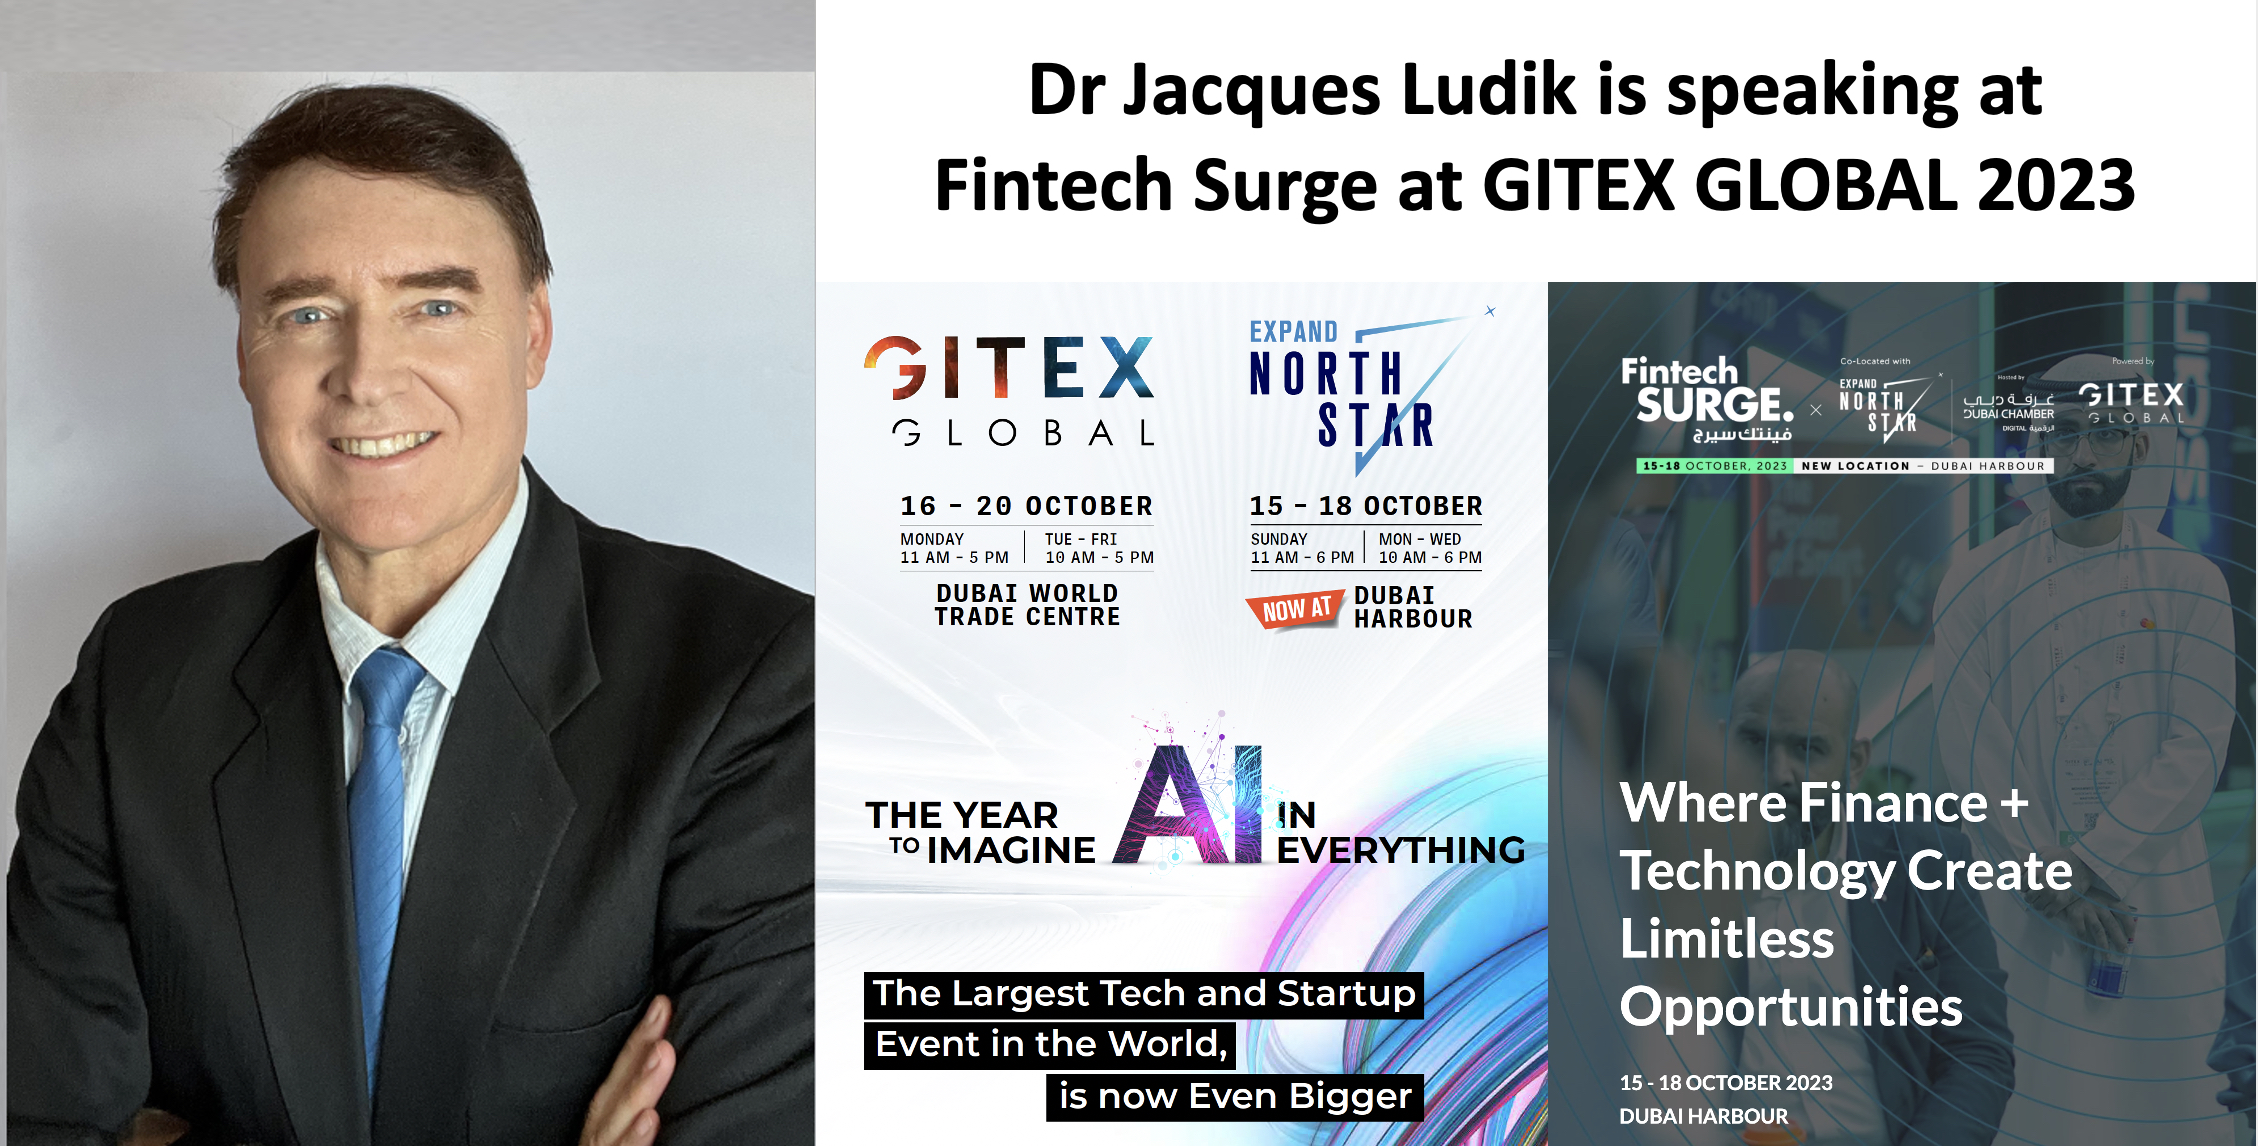 Dr Jacques Ludik will be a keynote speaker at Fintech Surge at GITEX GLOBAL Largest Tech & Startup Show in the World 16-20 October 2023